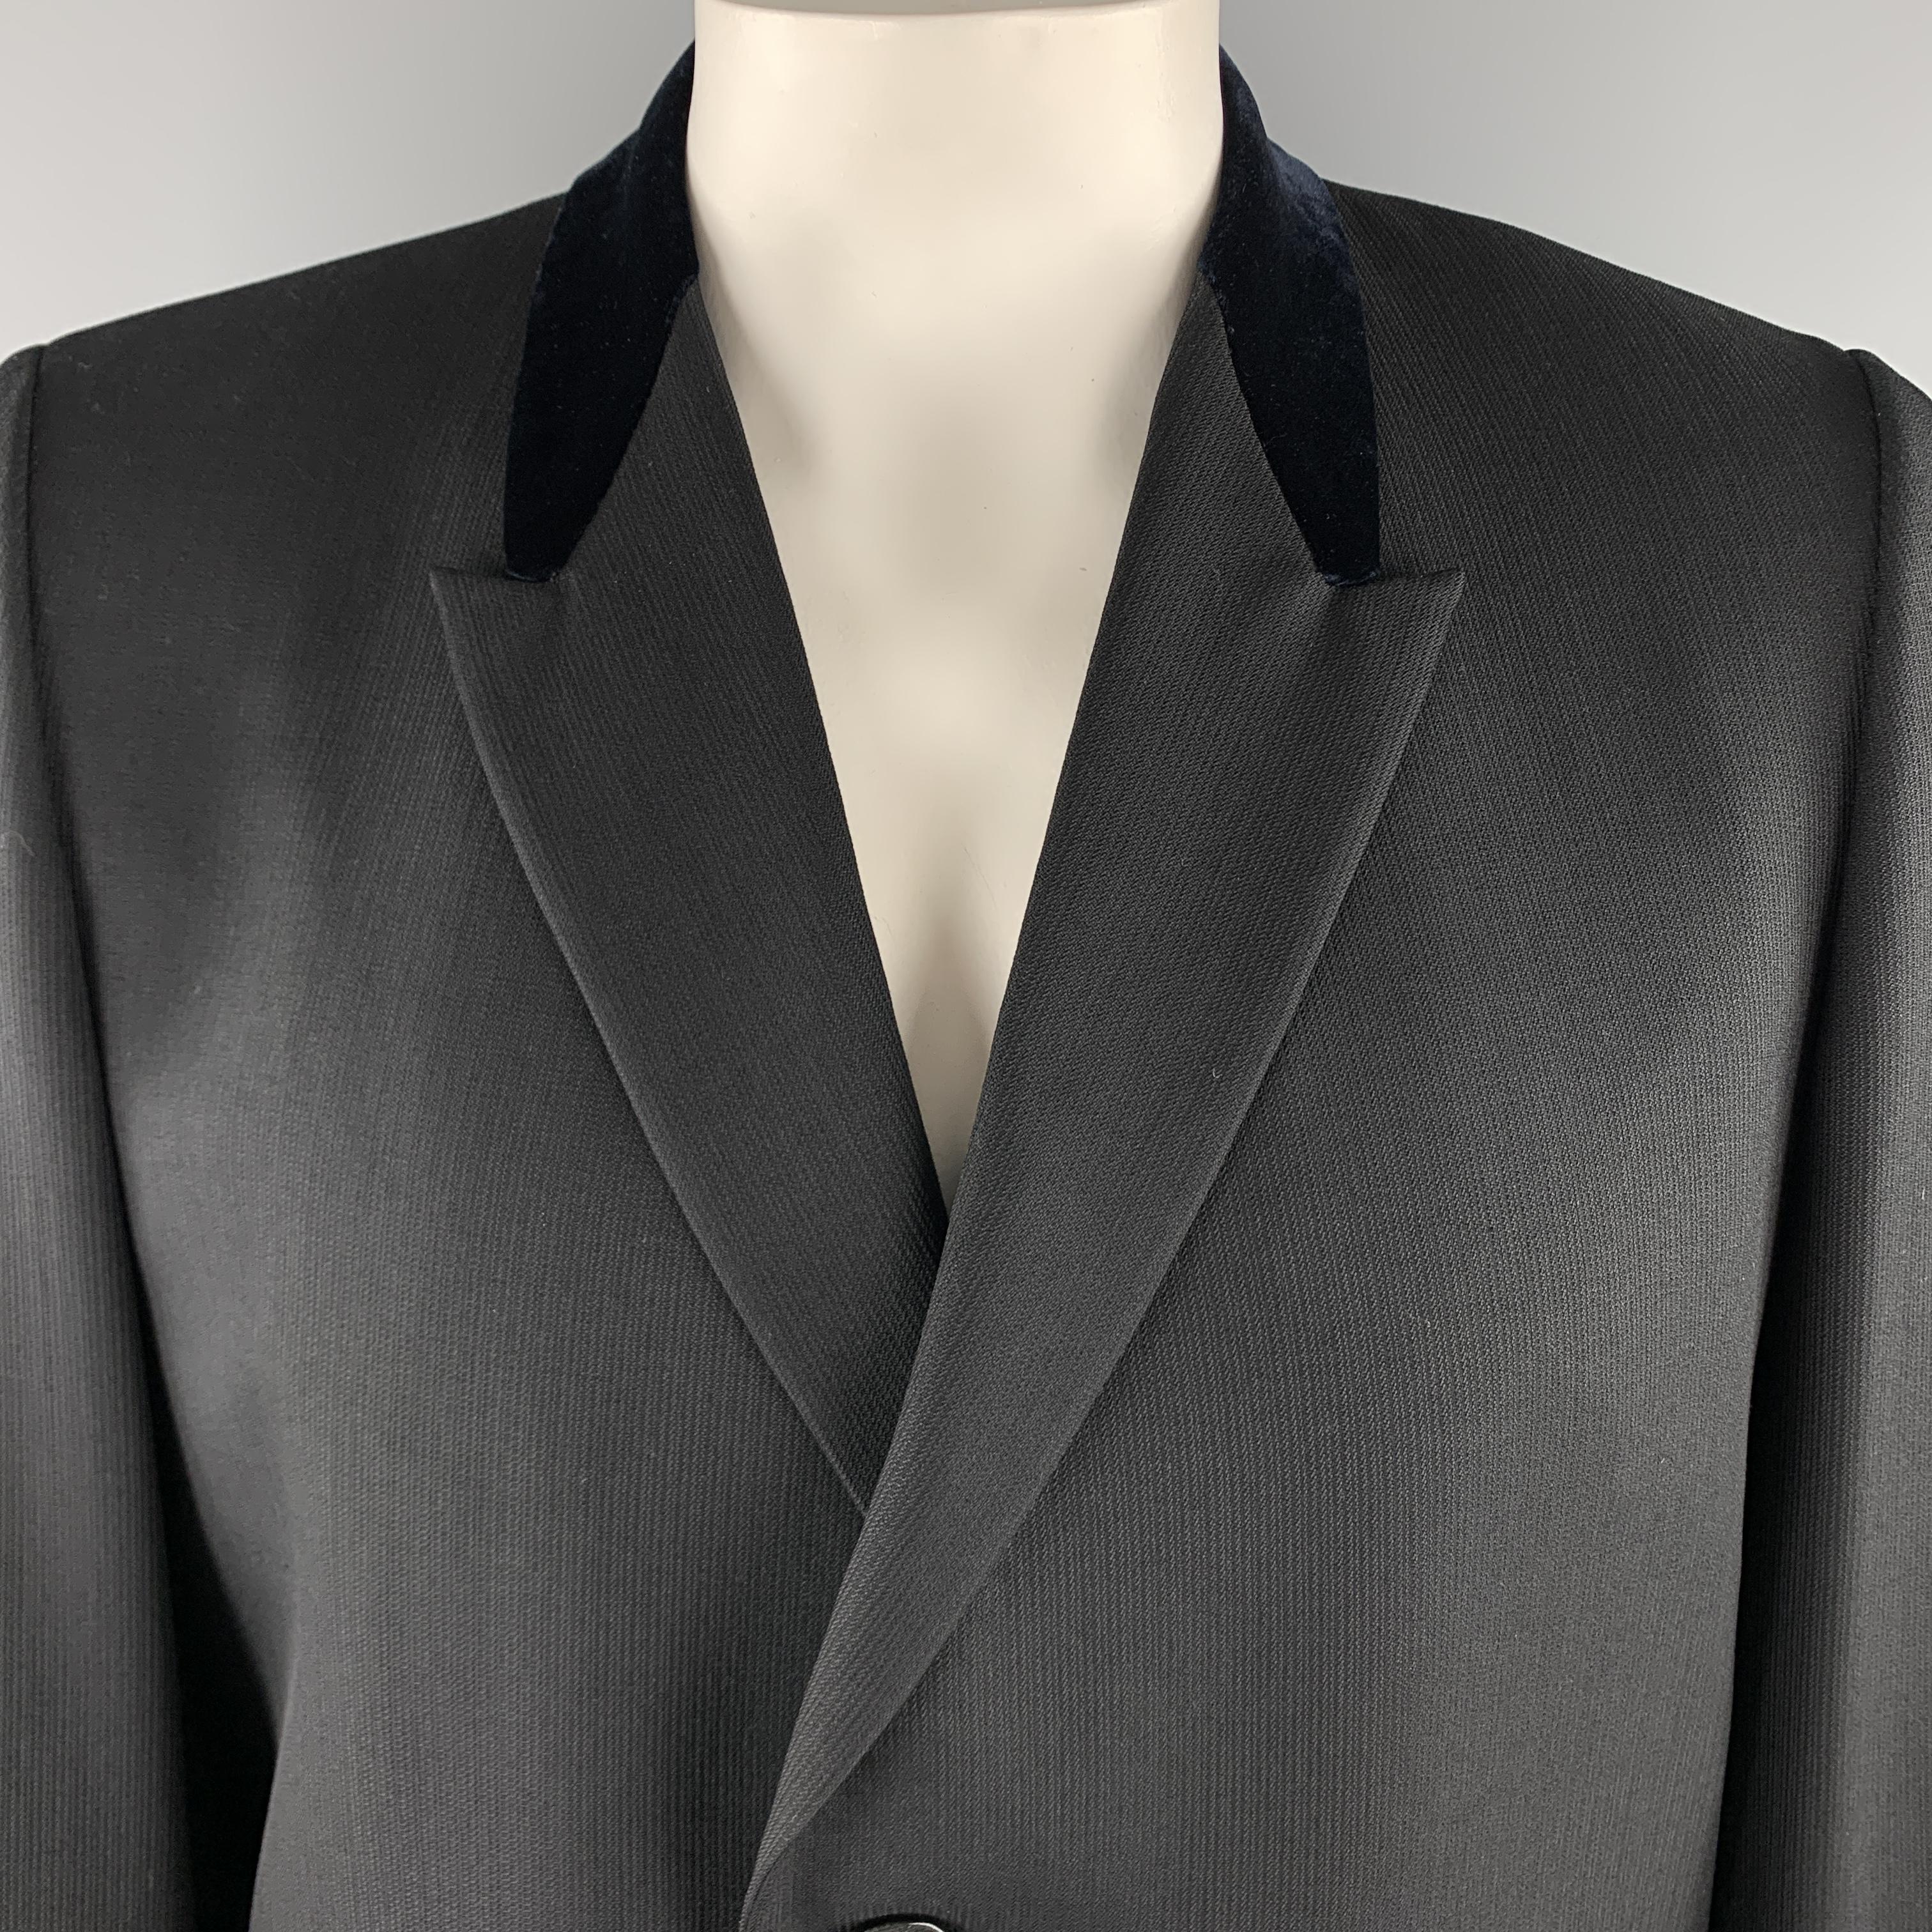 Vintage KUPPENHEIMER long coat comes in a solid black wool material, featuring a navy velvet peak lapel, two buttons at closure, single breasted, flap pockets, unbuttoned cuffs, and a double vent at back. 

Excellent Pre-Owned Condition.
Marked: US